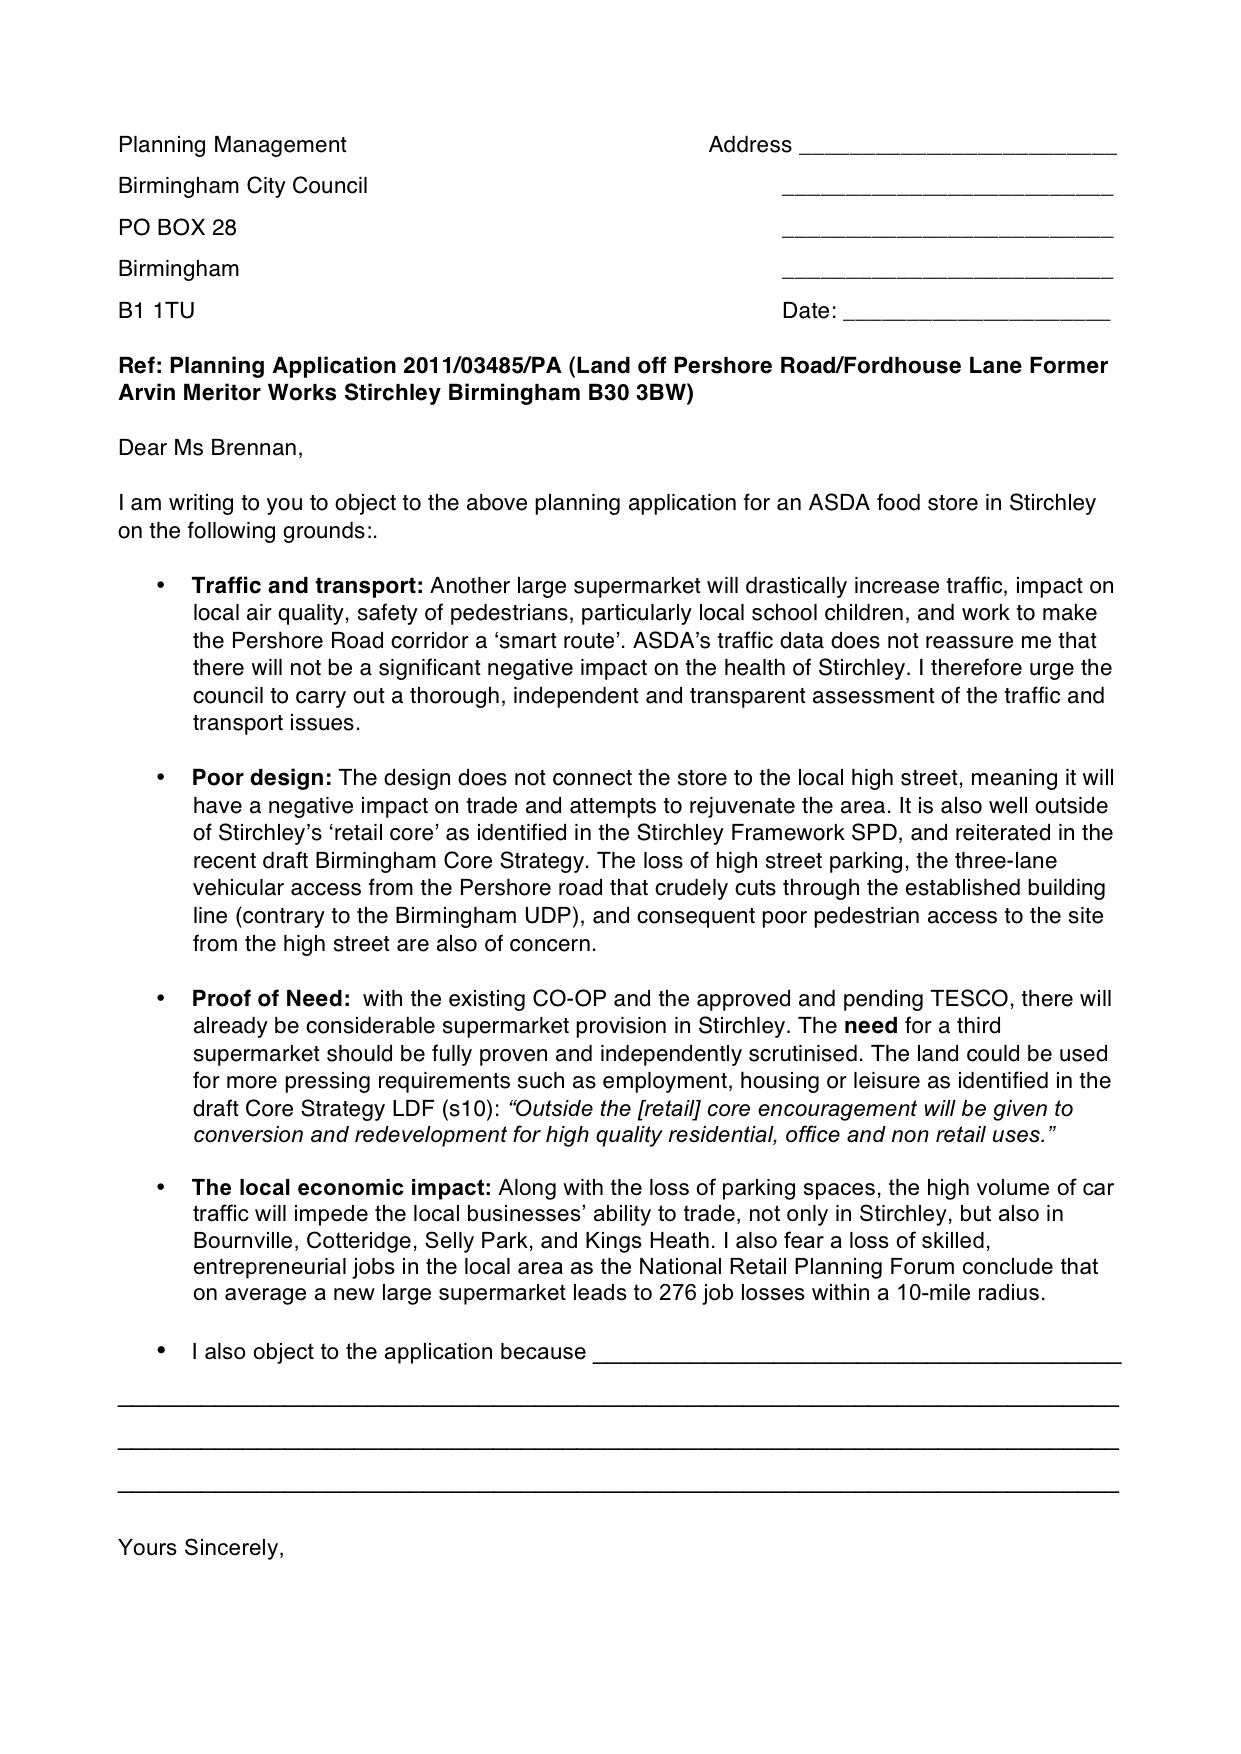 Objection Letter Template | Super Stirchley With Regard To Letter Of Objection Template